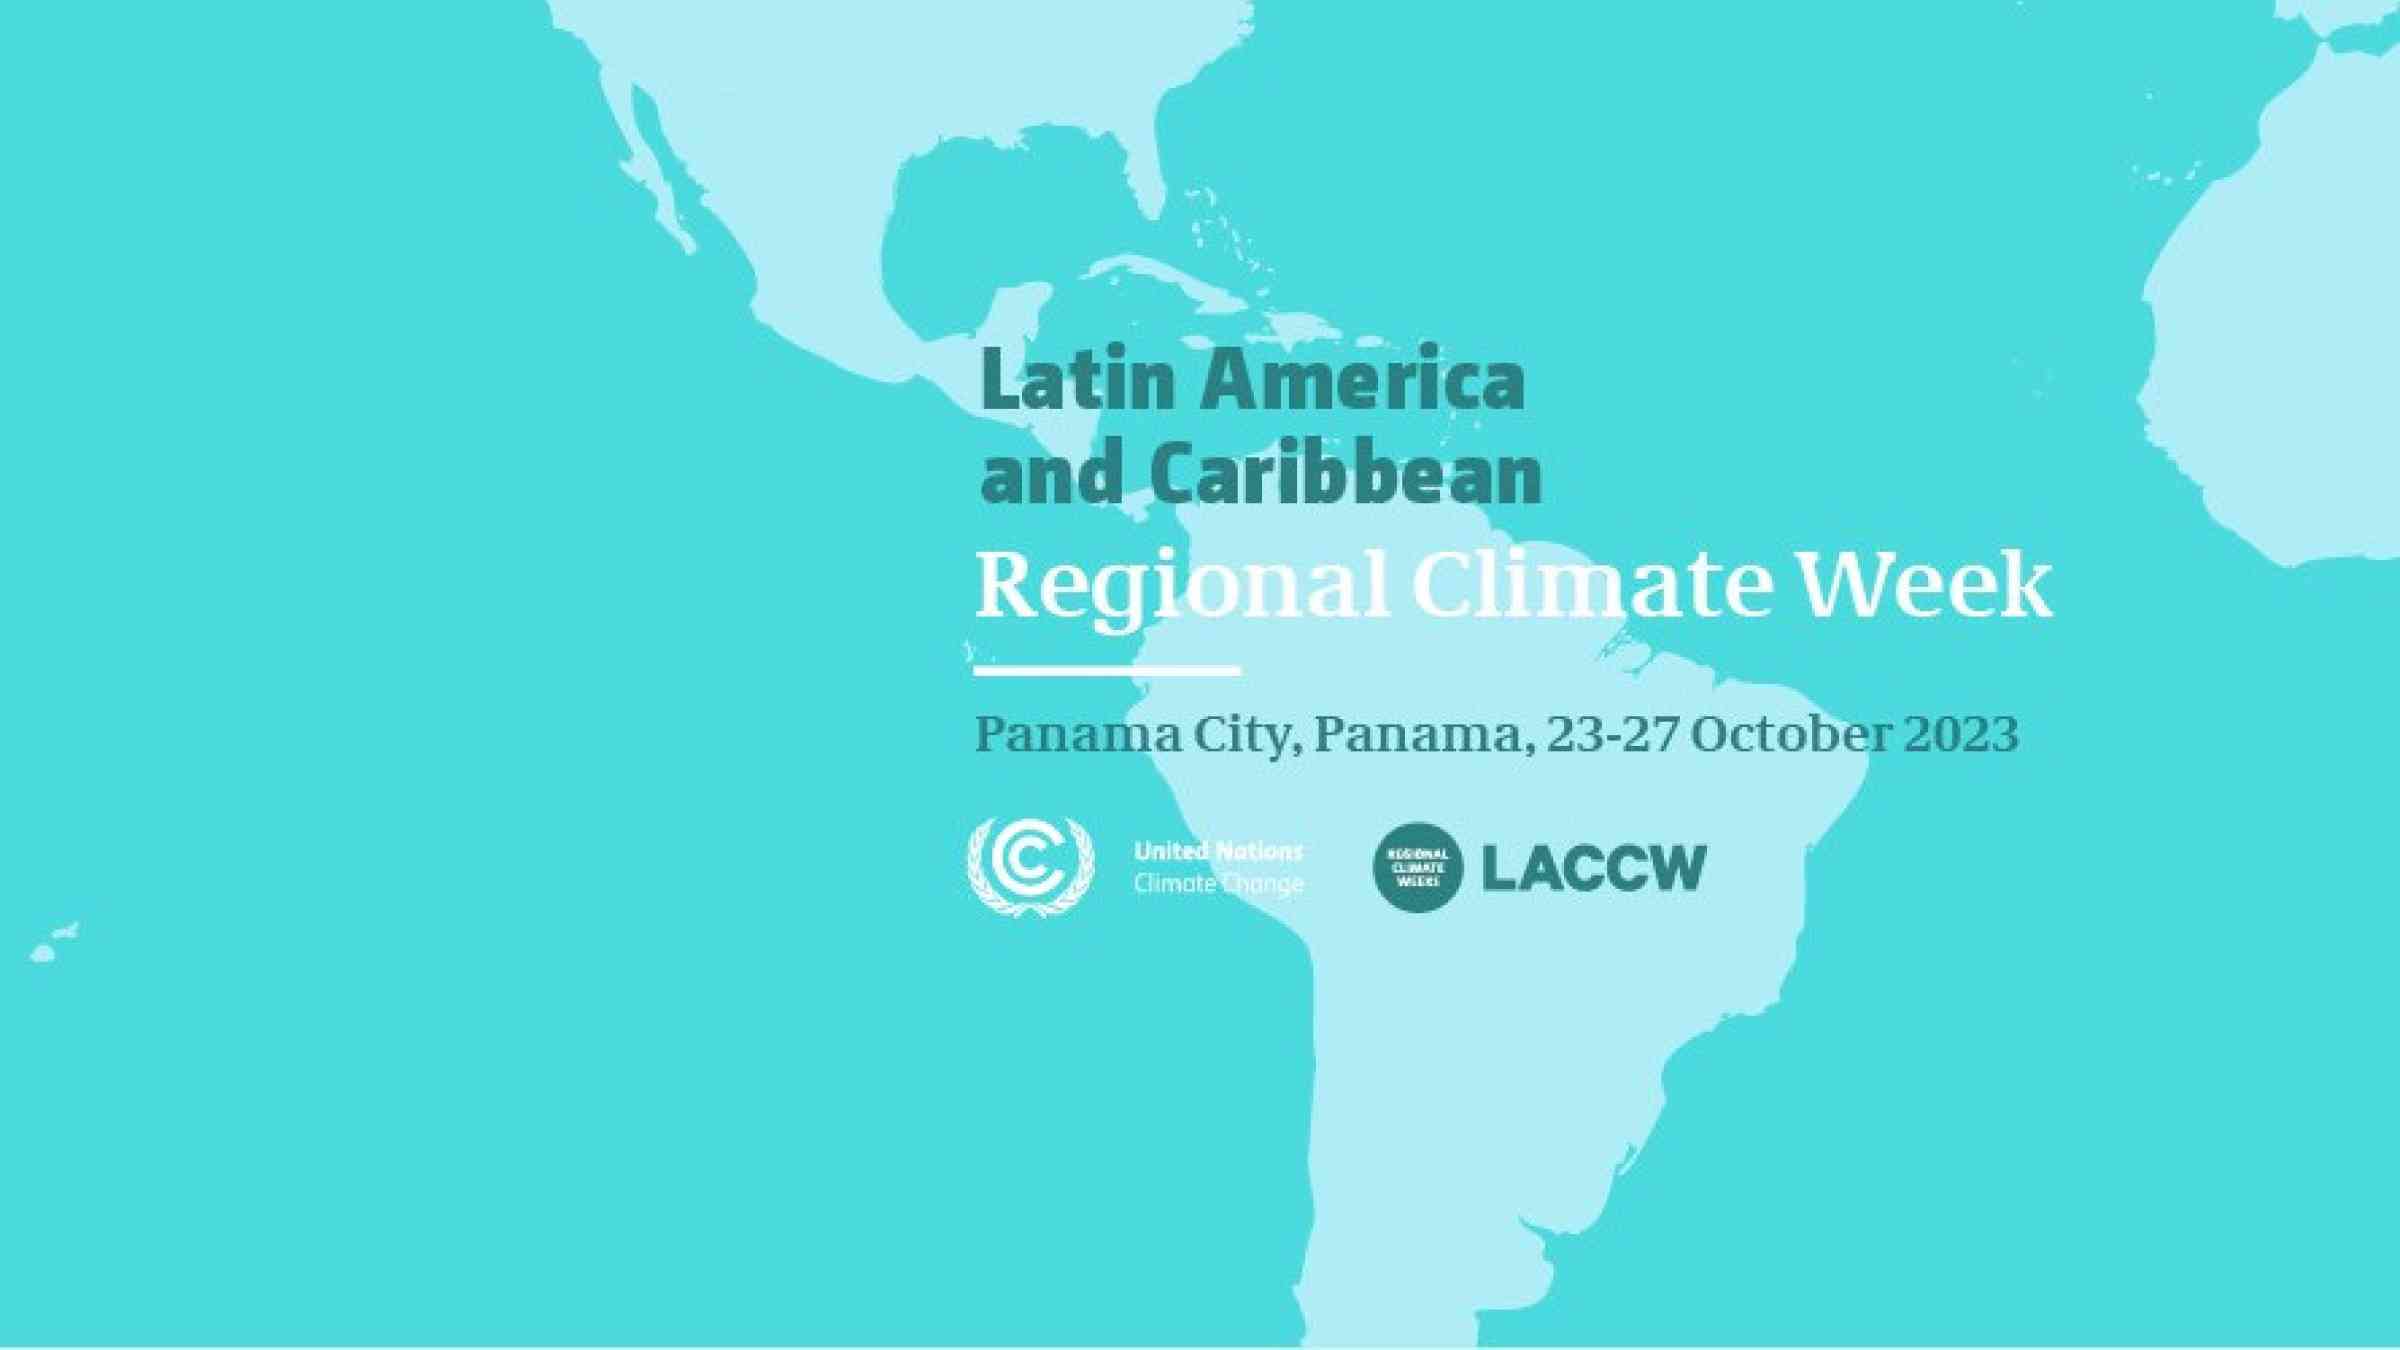 Climate Week LAC